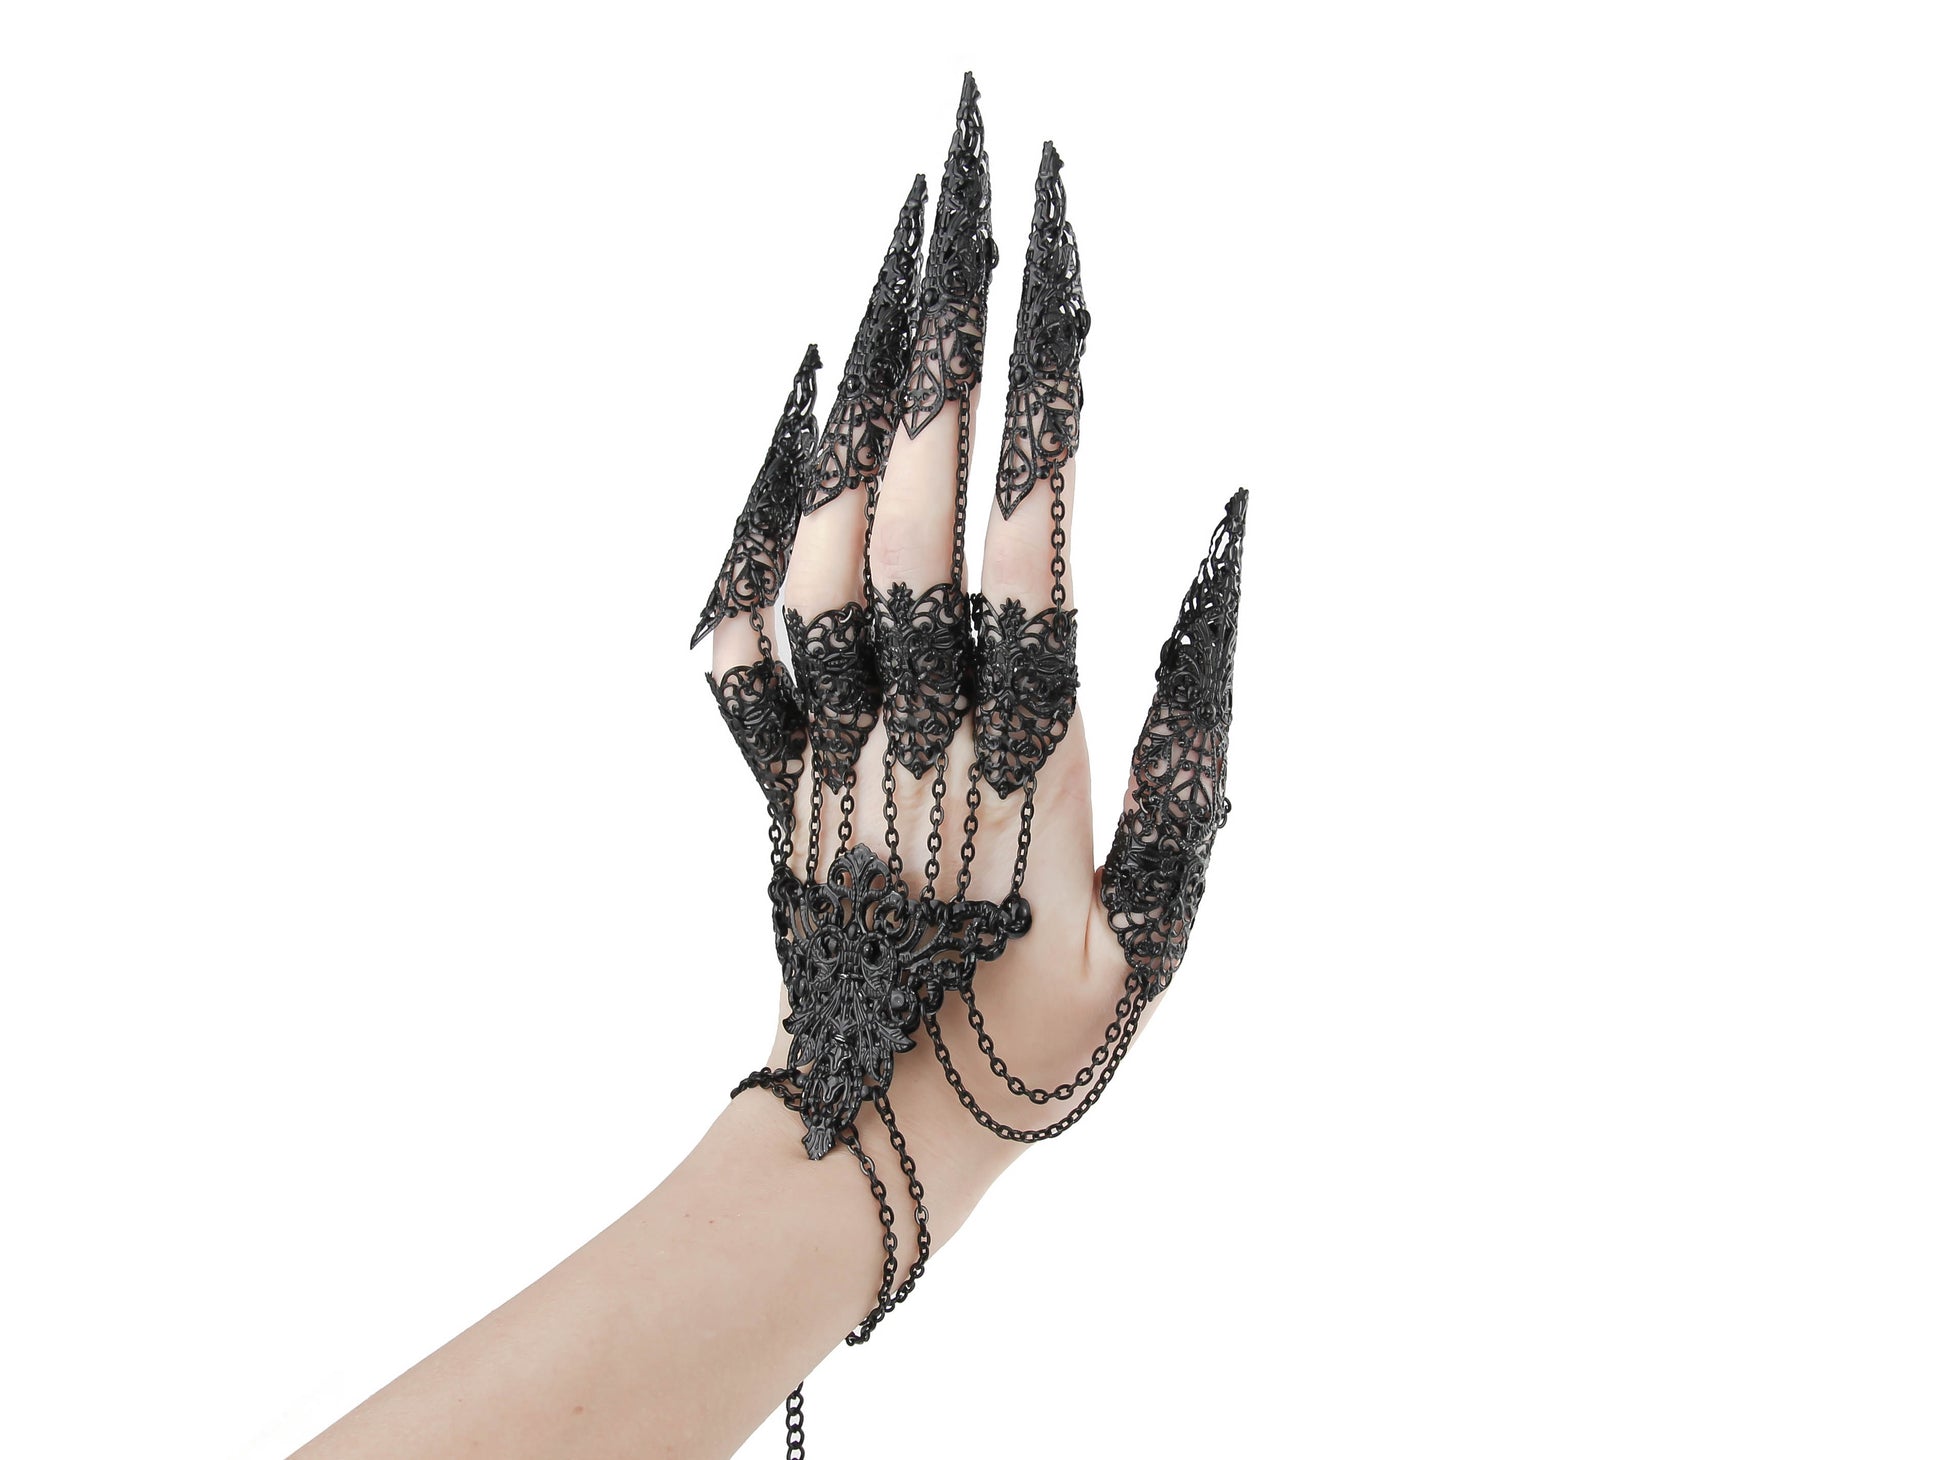 A hand adorned with a striking goth jewelry piece, featuring black claw-like extensions as part of its dark fashion design. The metal glove is embellished with intricate, gothic filigree patterns and interconnected chains, perfect for an edgy, alternative look.